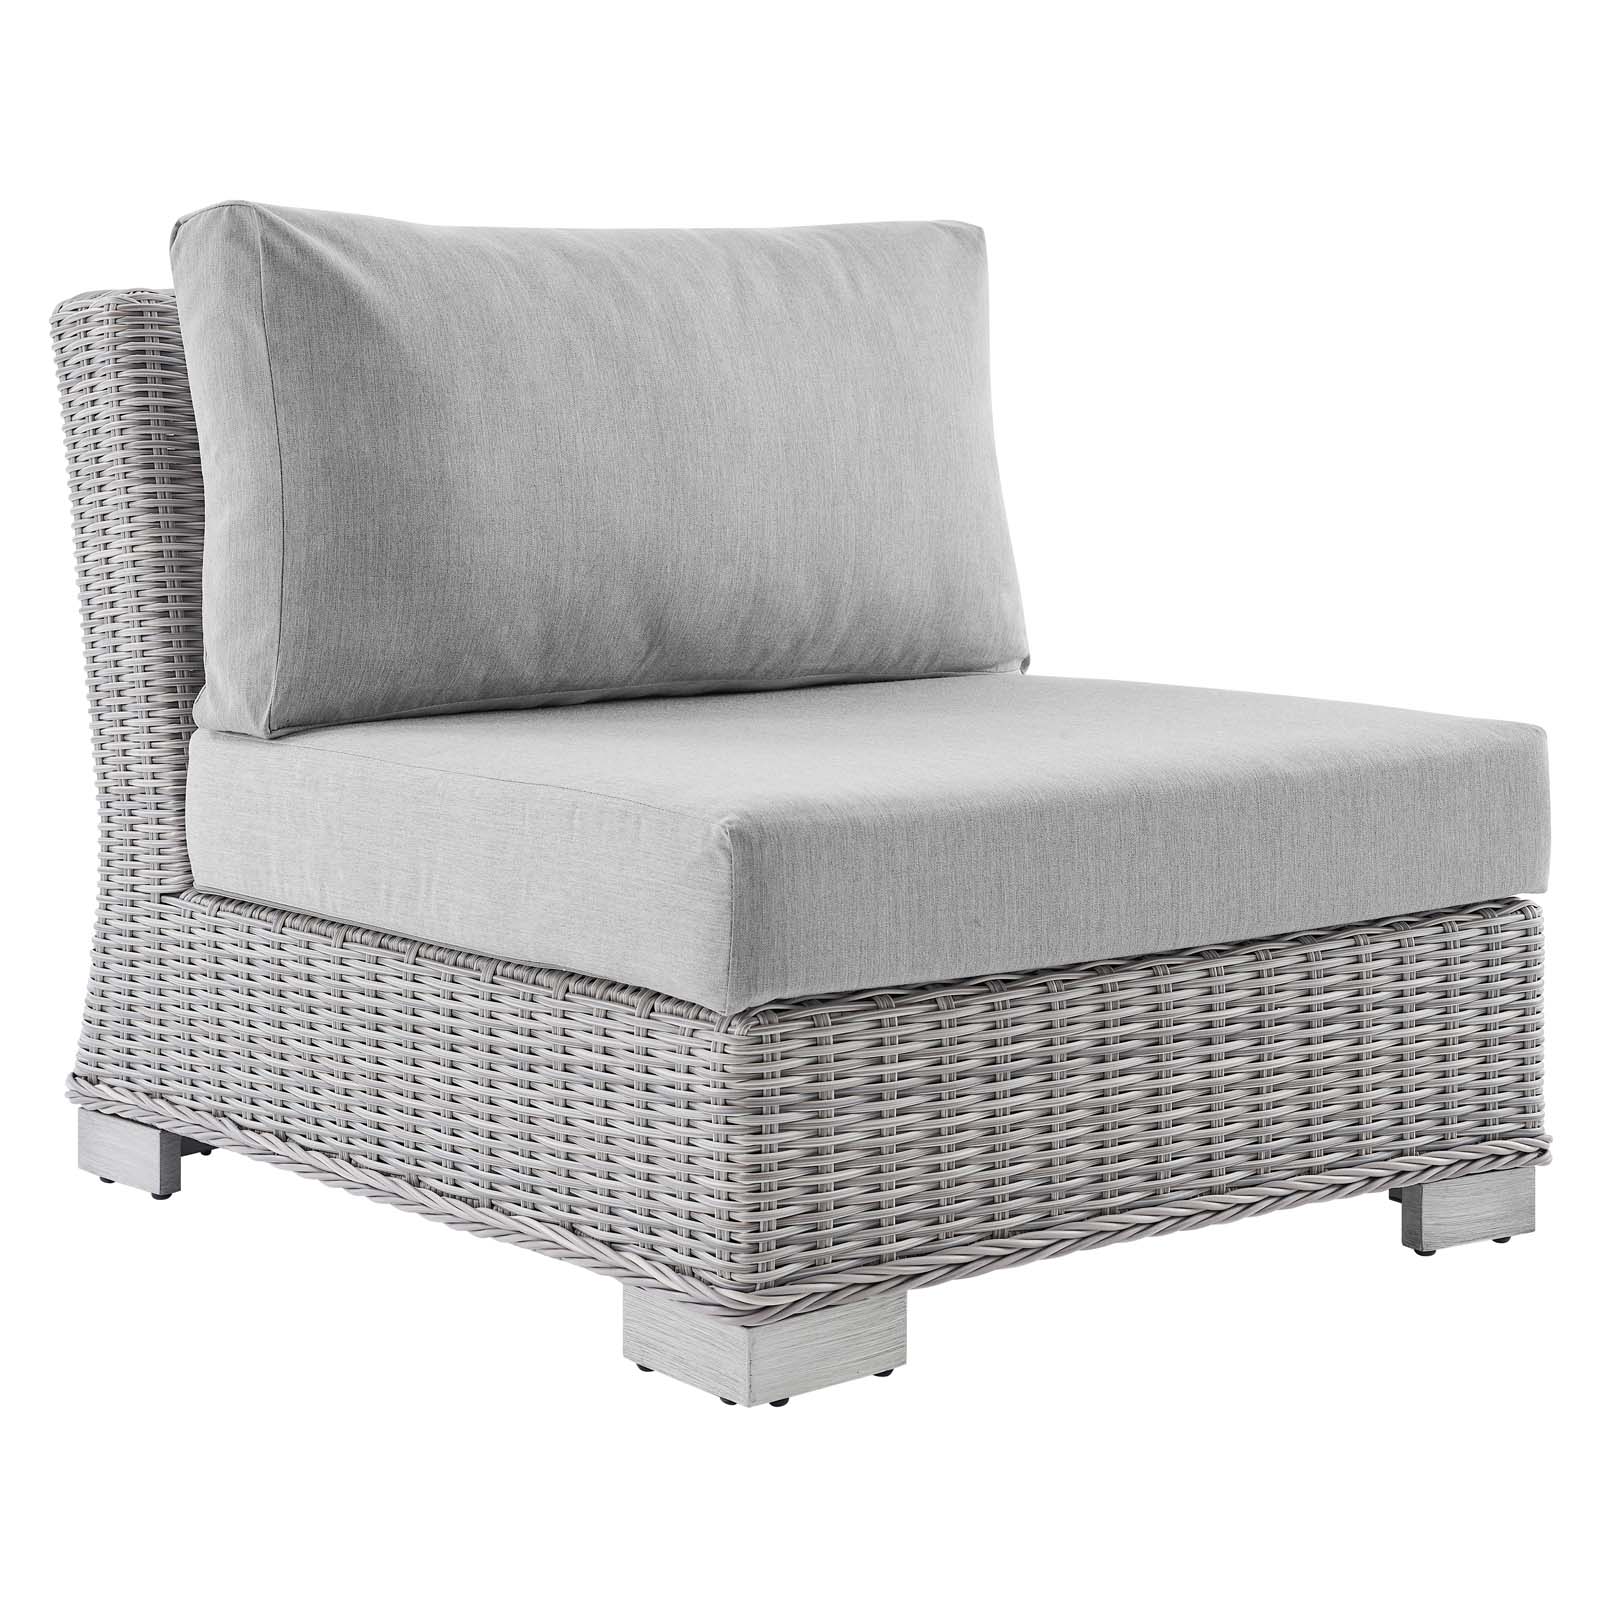 Modway Conway Sunbrella® Outdoor Patio Wicker Rattan Armless Chair in Light Gray Gray - image 2 of 9